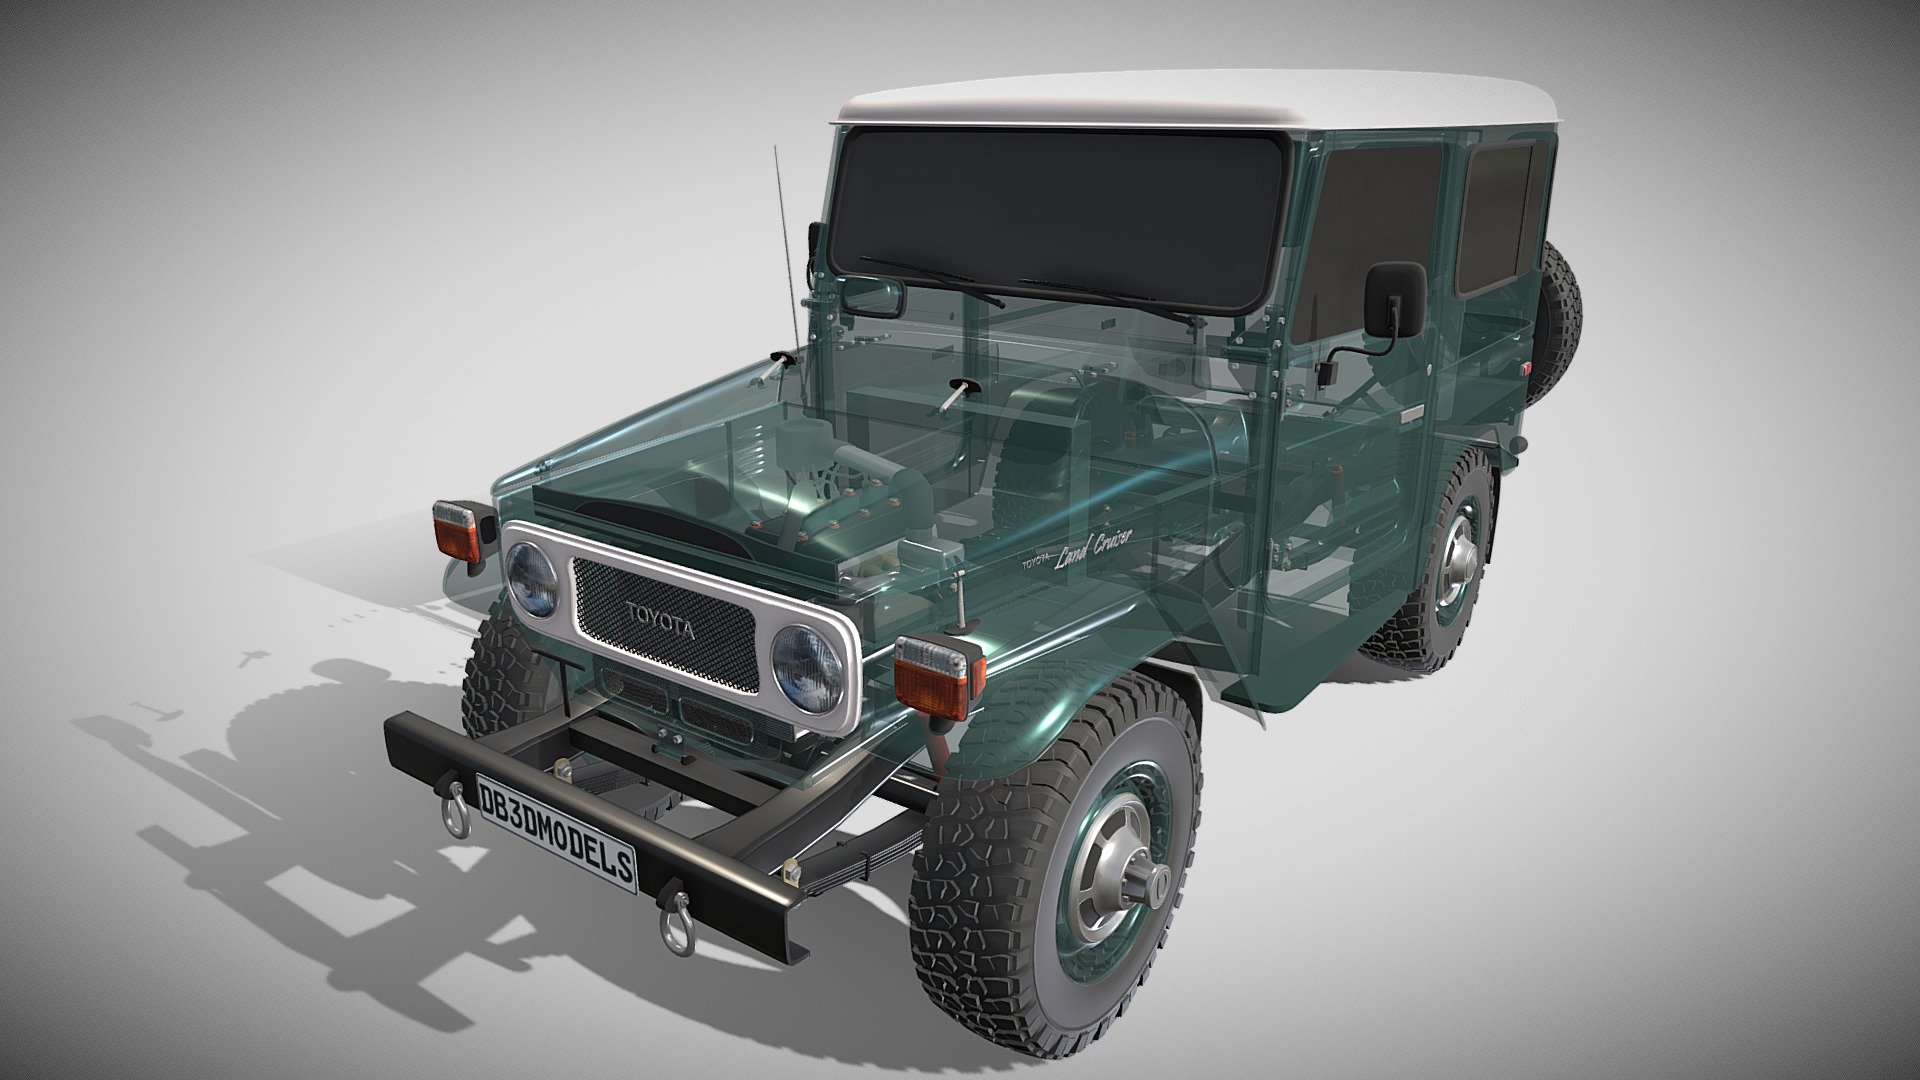 Toyota Land Cruiser Fj-40 with full chassis (motor setup, transmission, brakes, linkages, suspension, steering) 3d model rendered with Cycles in Blender, as per seen on attached images.

File formats:
-.blend, rendered with cycles, as seen in the images;
-.blend, rendered with cycles, with a see-through of the chassis, as seen in the images;
-.obj, with materials applied;
-.dae, with materials applied;
-.fbx, with material slots applied;
-.stl;

Files come named appropriately and split by file format.

3D Software:
The 3D model was originally created in to Blender 2.79 and rendered with Cycles.

Materials and textures:
The models have materials applied in all formats, and are ready to import and render.
The models come with no image textures as everything is material based.

Preview scenes:
The preview images are rendered in Blender using its built-in render engine &lsquo;Cycles' 3d model